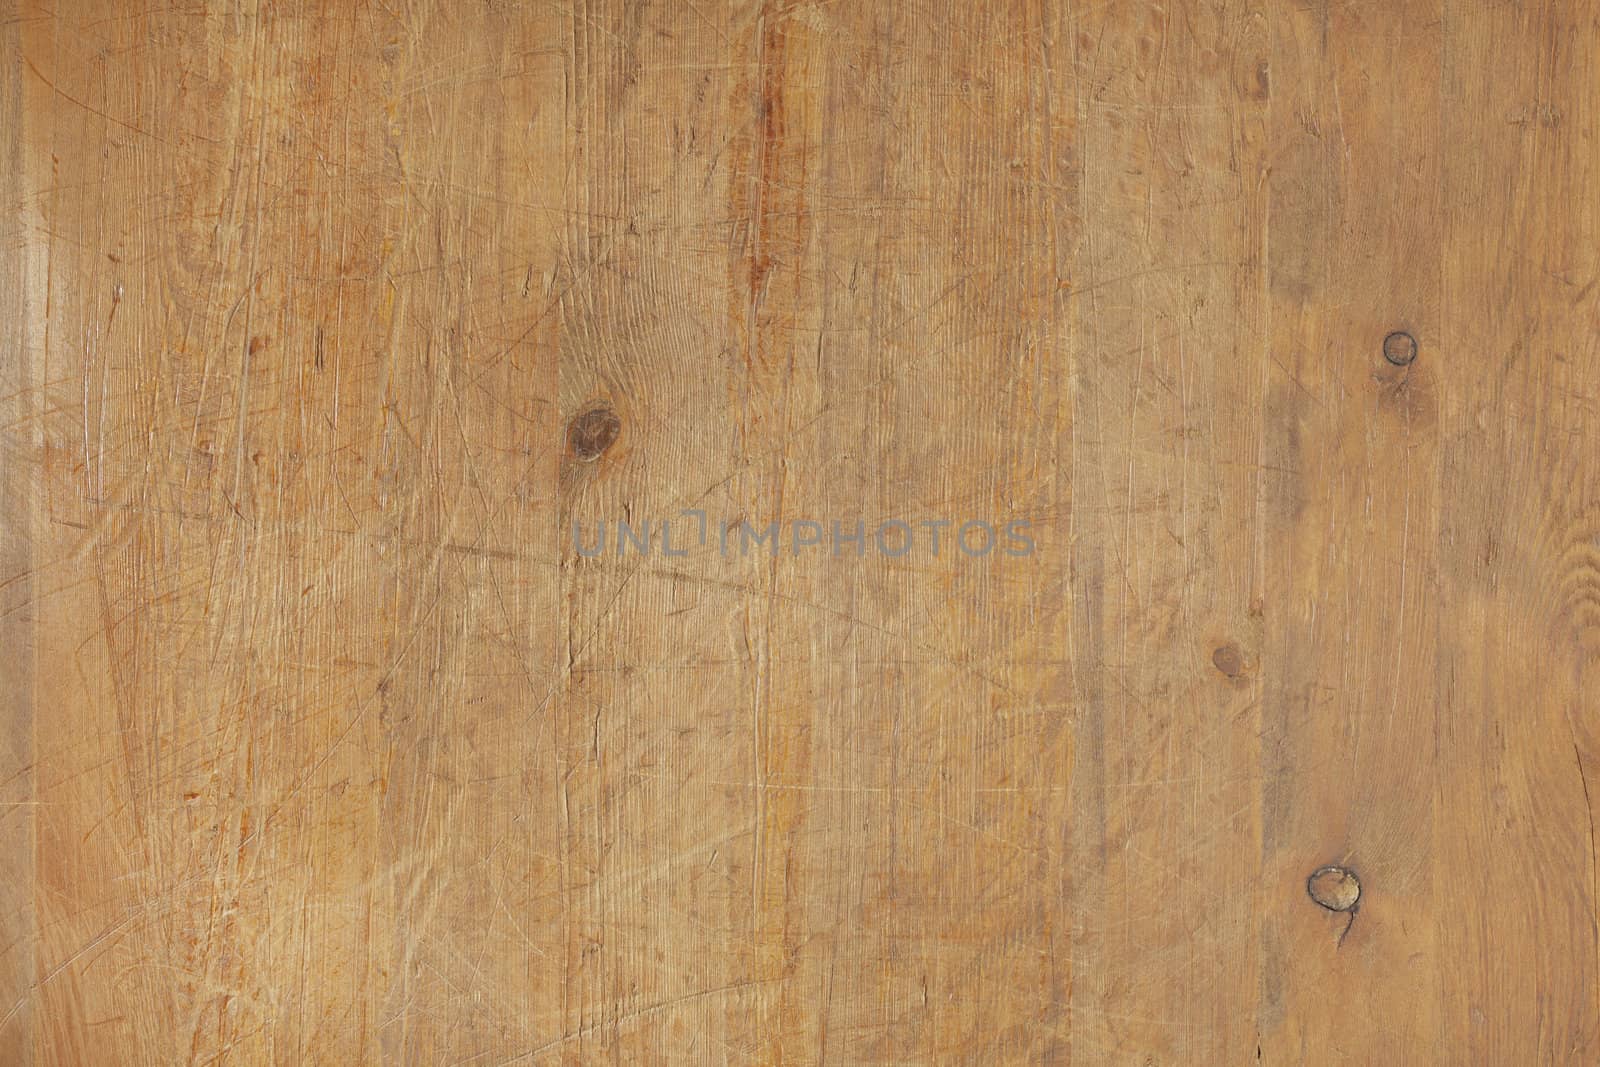 Hi-res background image of scratched and worn wood